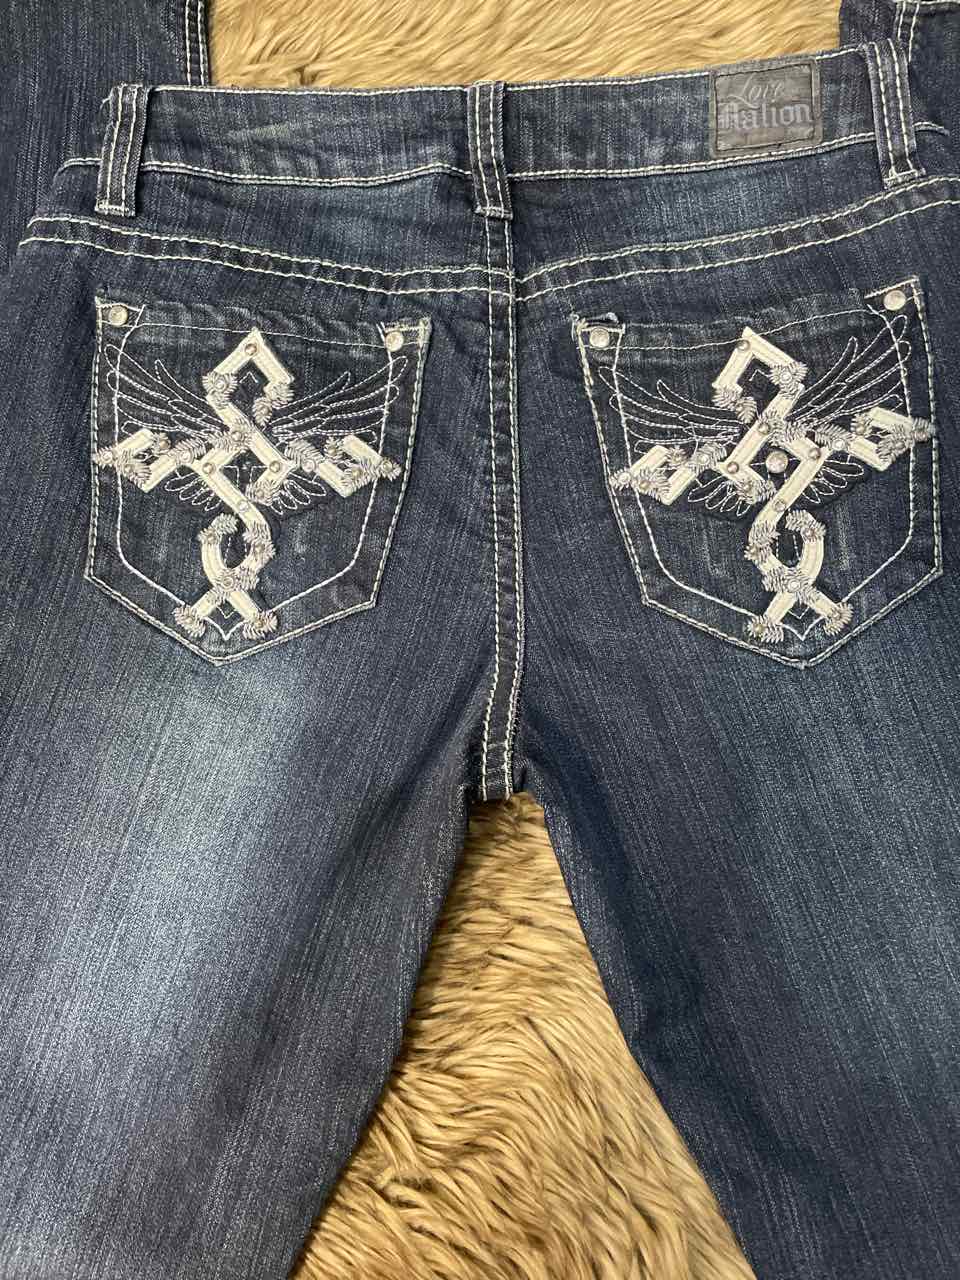 4 - Love Nation Jeans